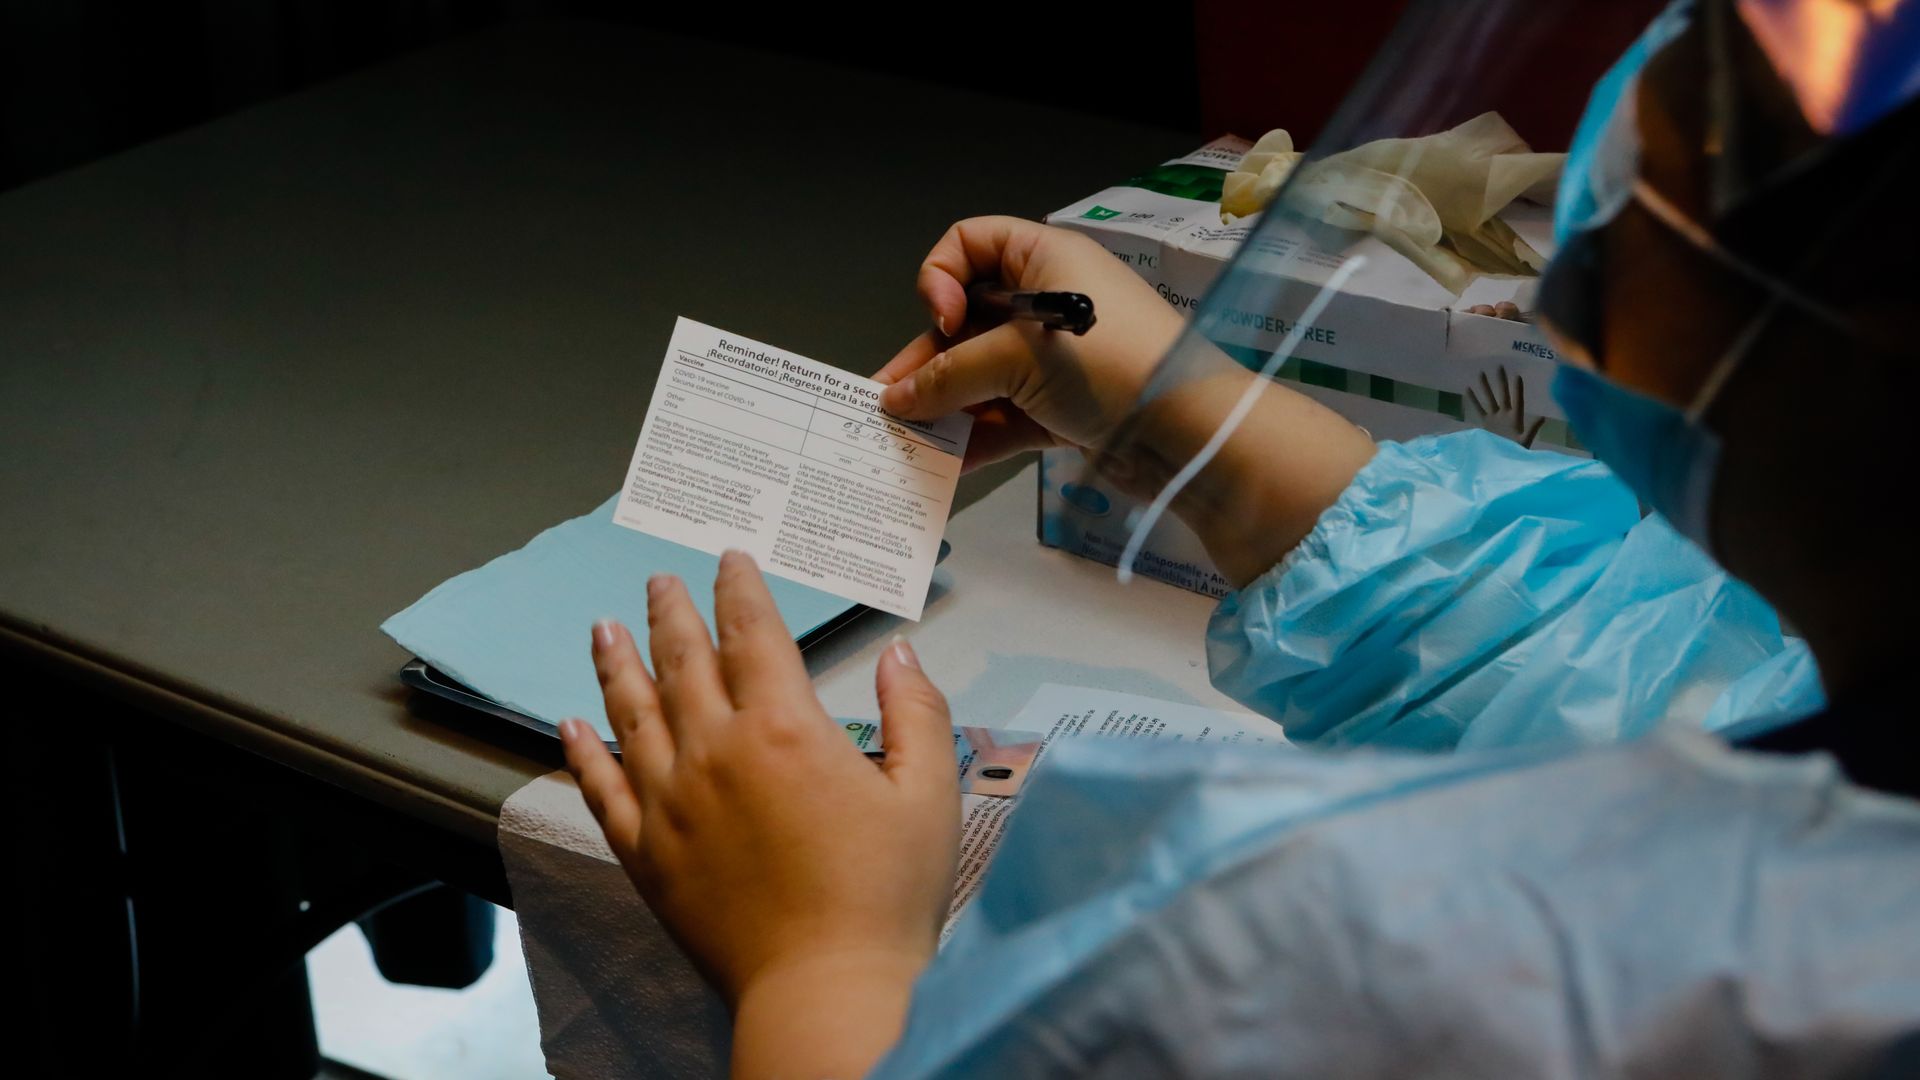 A healthcare worker holds a Covid-19 vaccination card during an event hosted by the Miami Heat at the FTX Arena in Miami, Florida, U.S., on Thursday, Aug. 5, 2021.